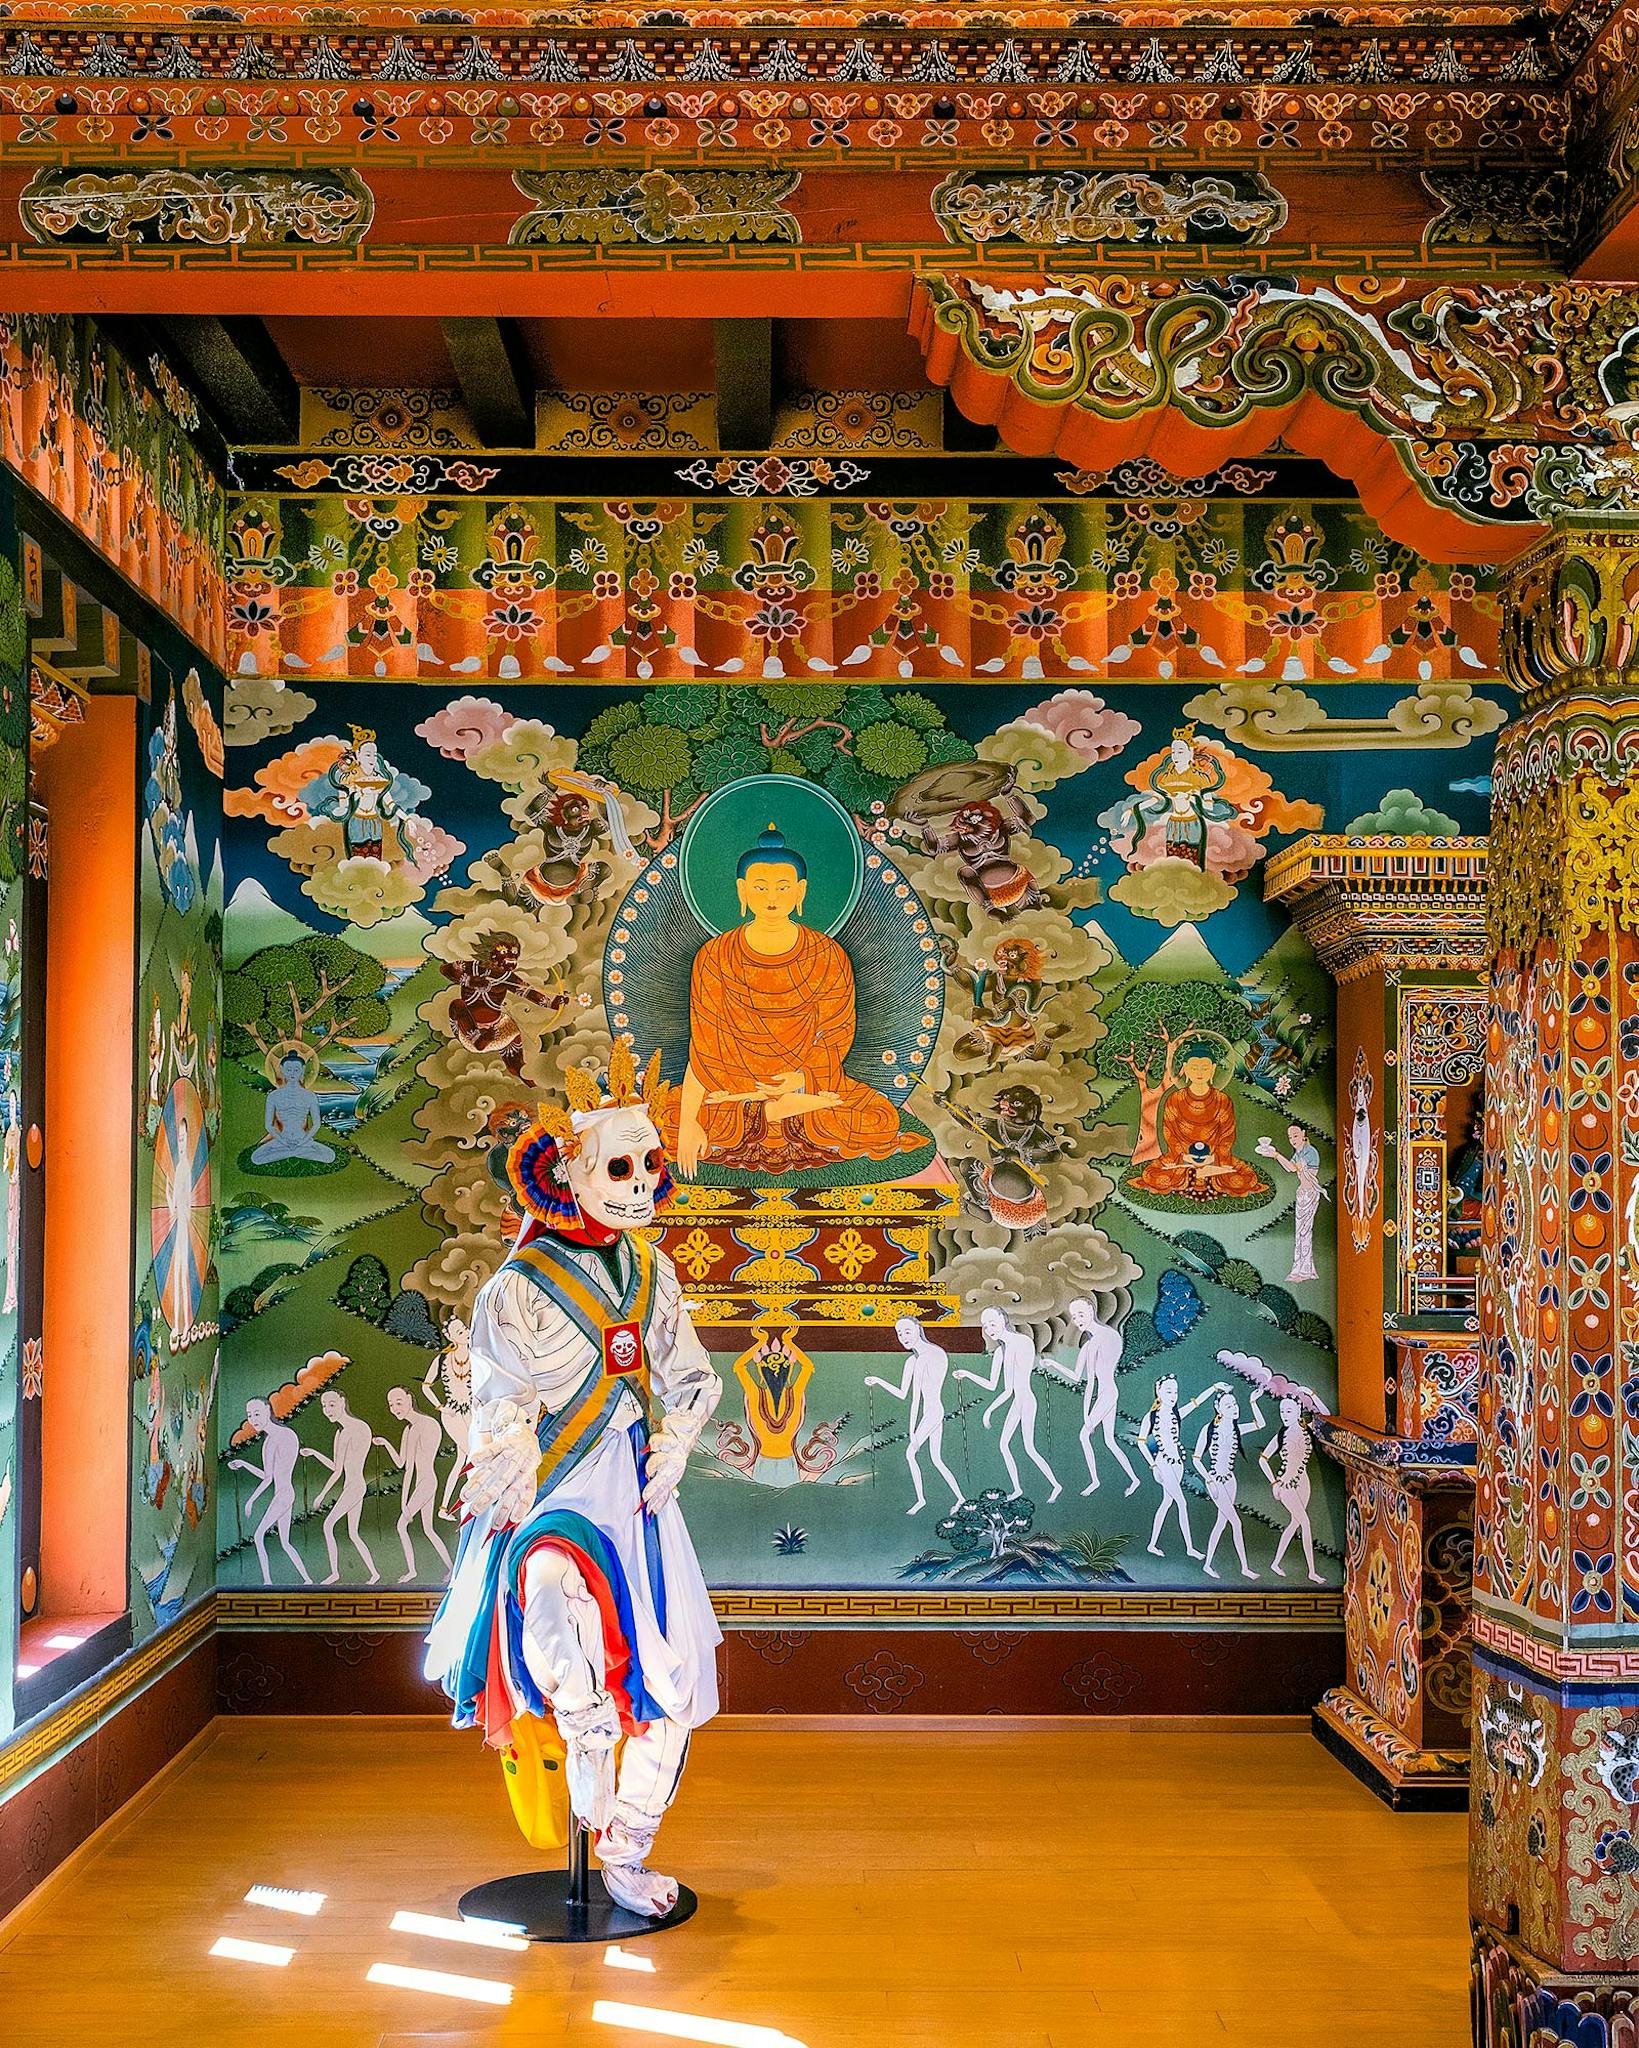 The Durdag Cham (The Dance of the Lords of Cremation Ground), is one of the figures on display inside the Lhakang.